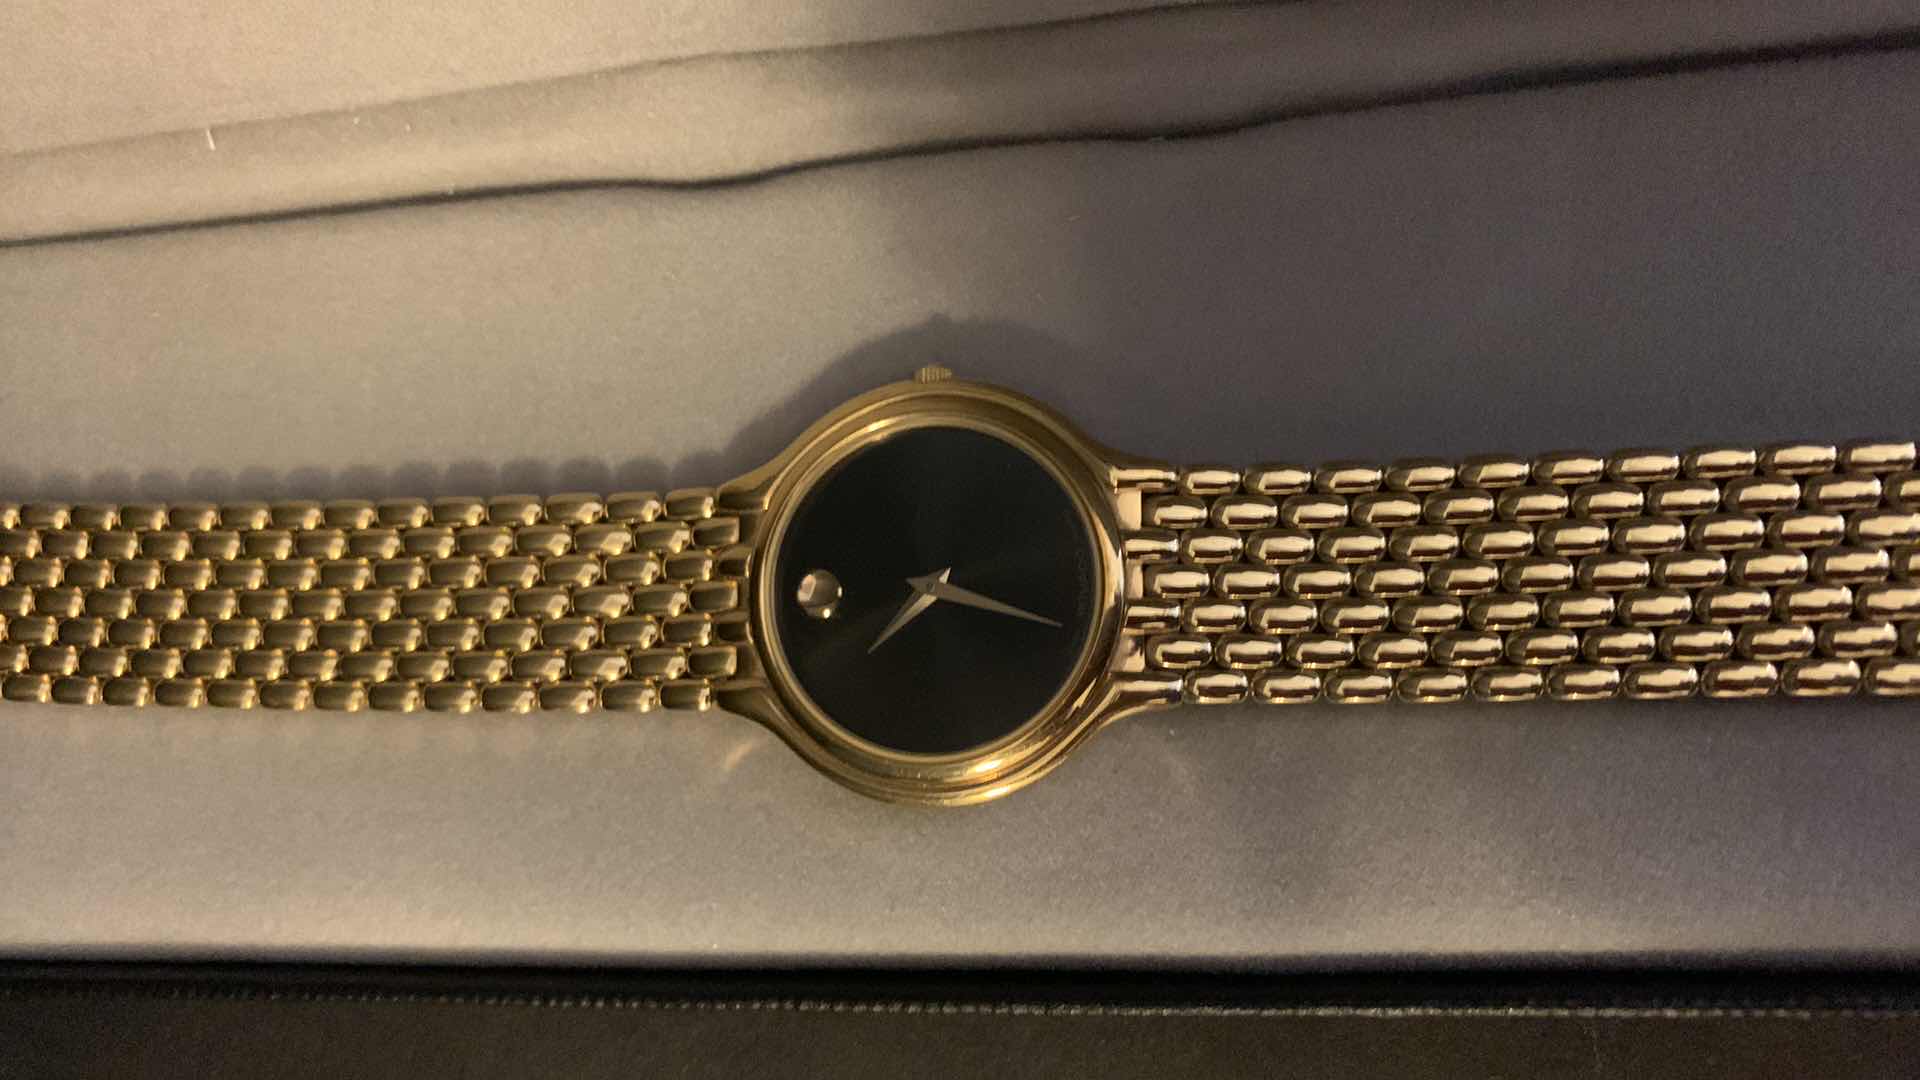 Photo 3 of MENS  GOLD MOVADO WATCH W BOX, CASE, LINKS, AND RECEIPT $650 in 1990